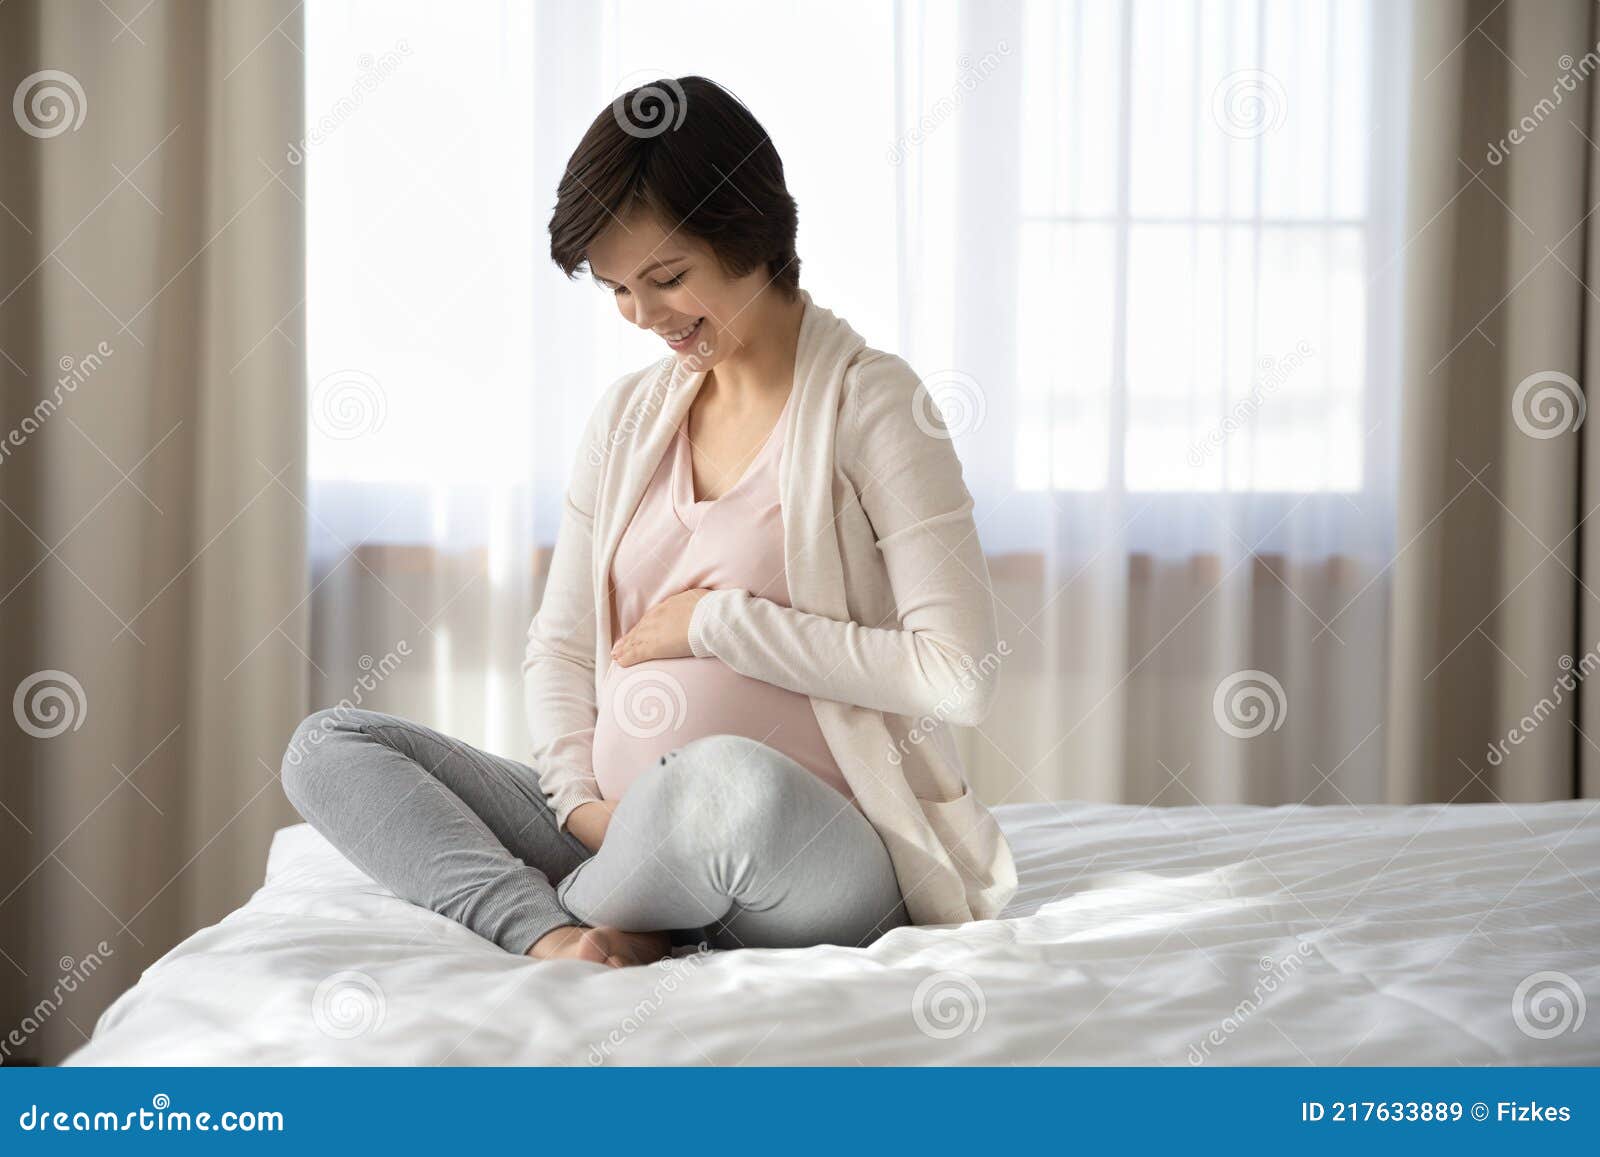 smiling pregnant woman caress baby bump relaxing